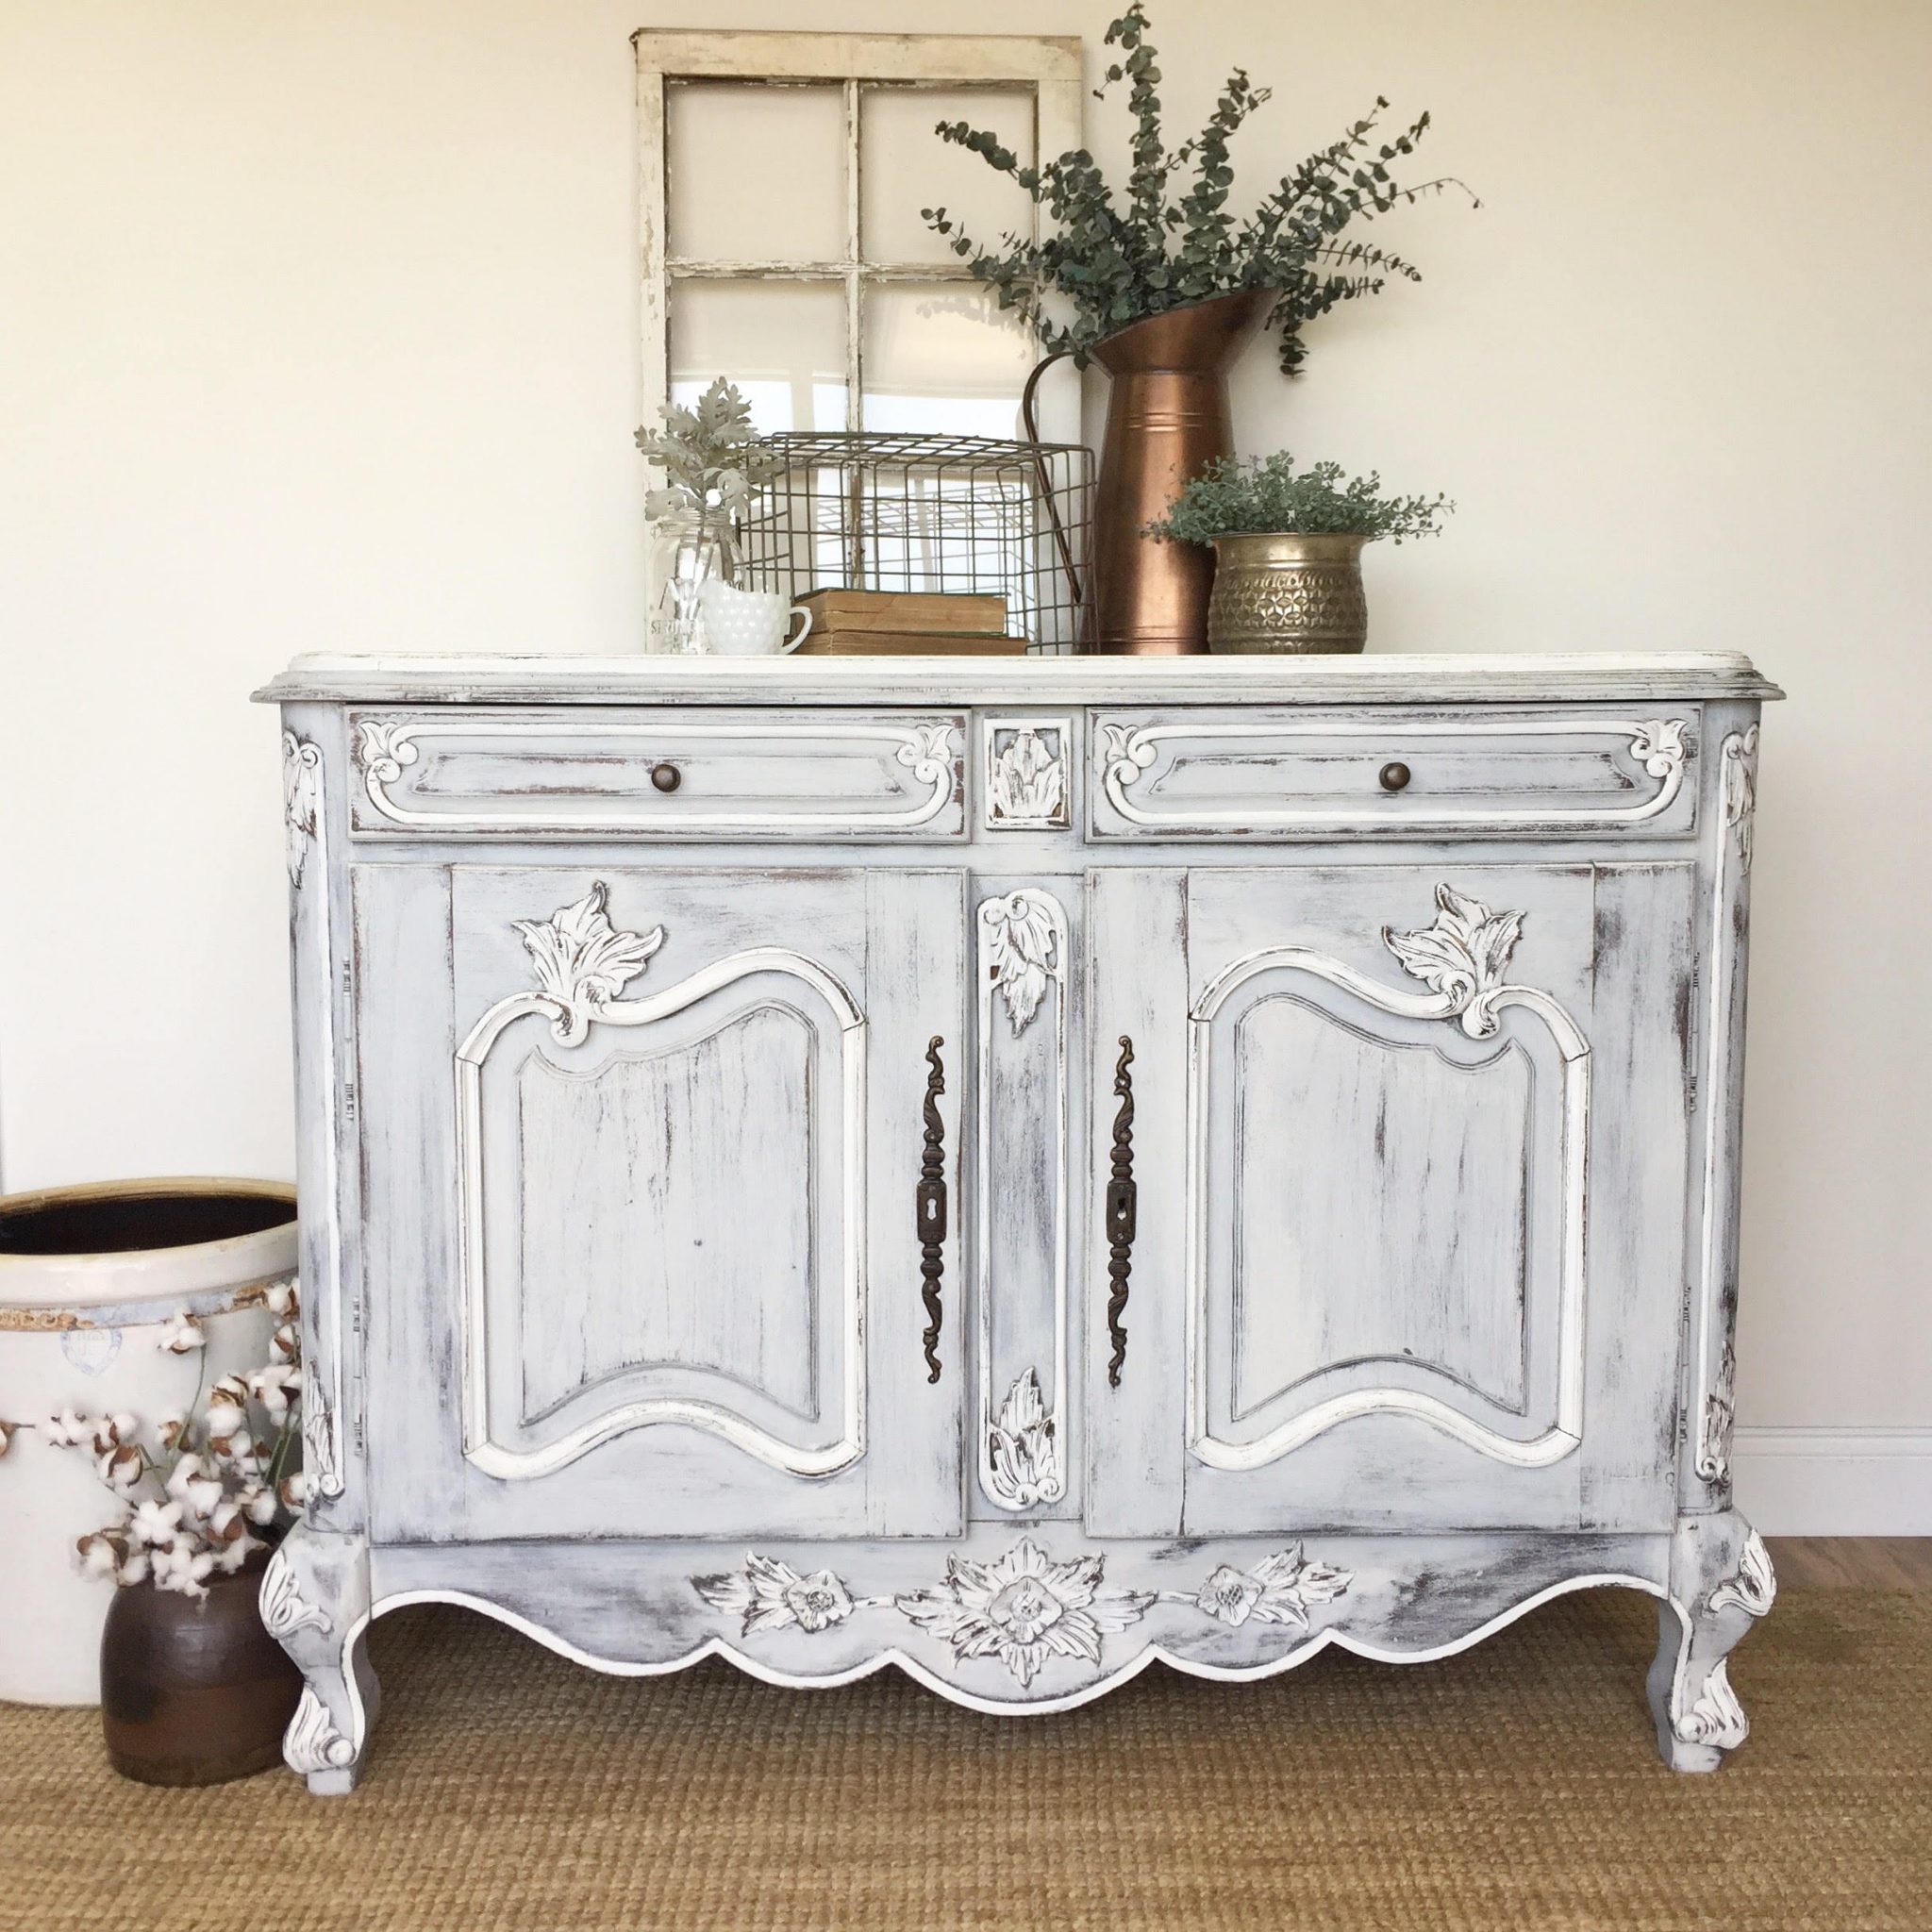 ... luxurious French country house furniture 39 for you with French country house TNSXPBM